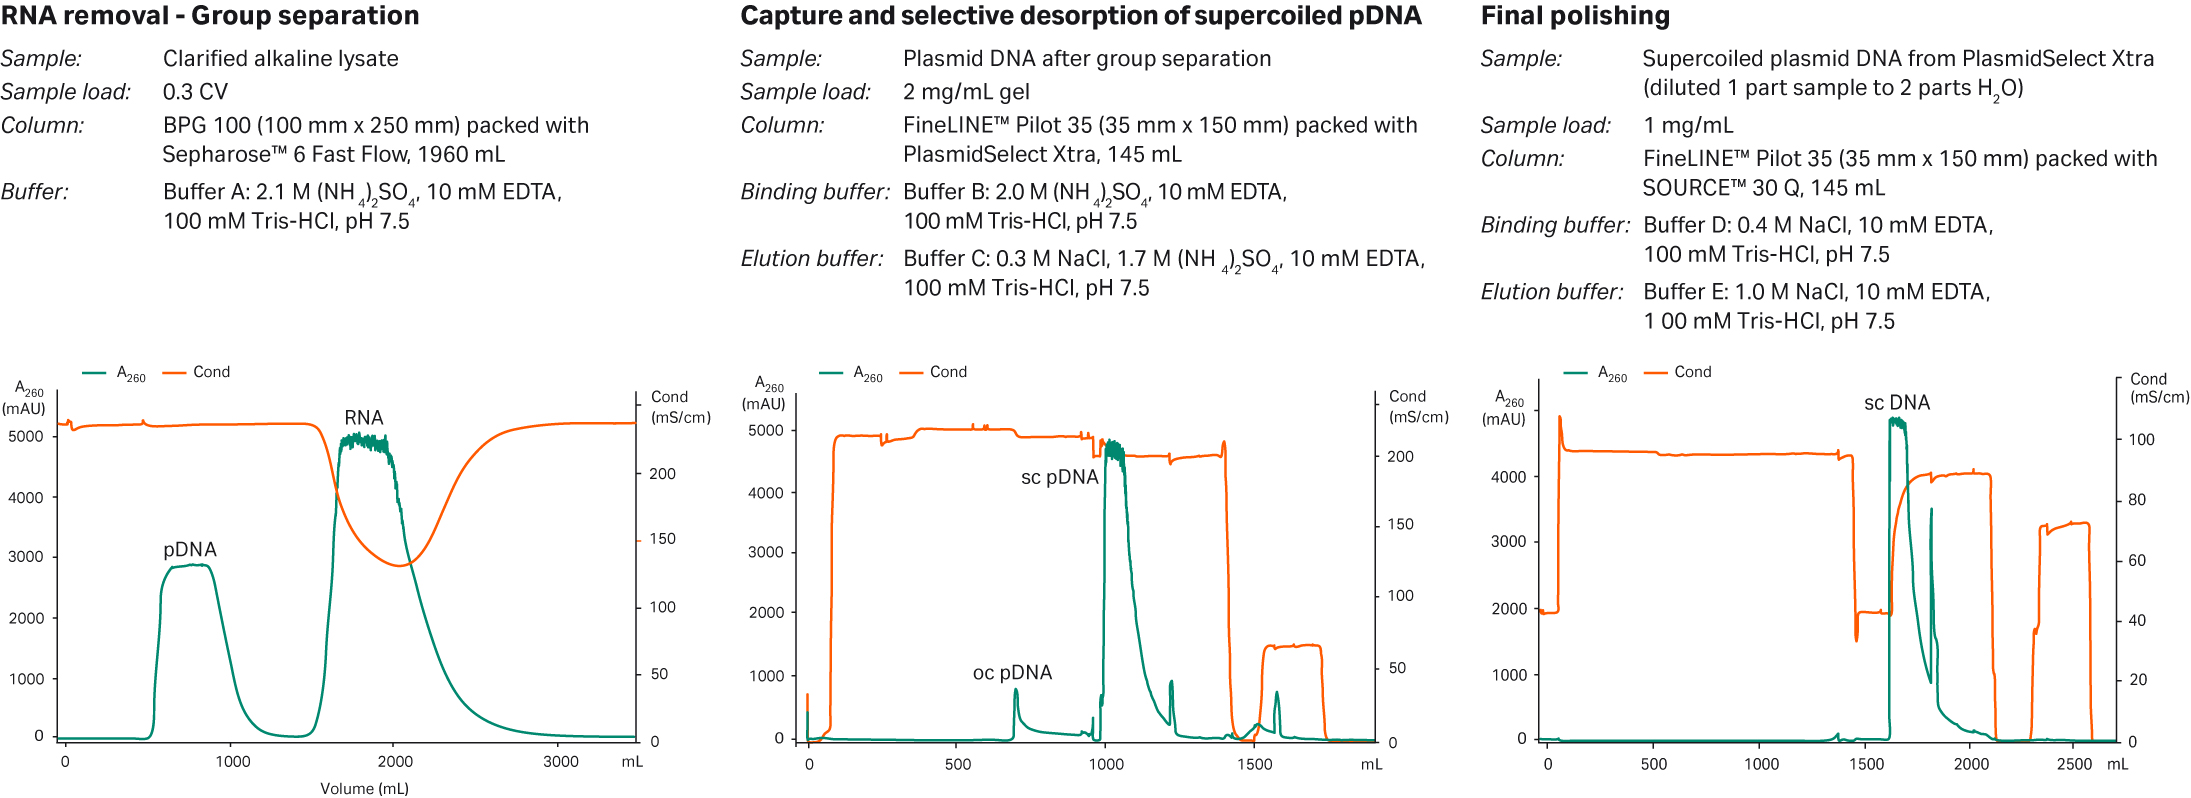 Purification of supercoiled plasmid DNA at pilot scale